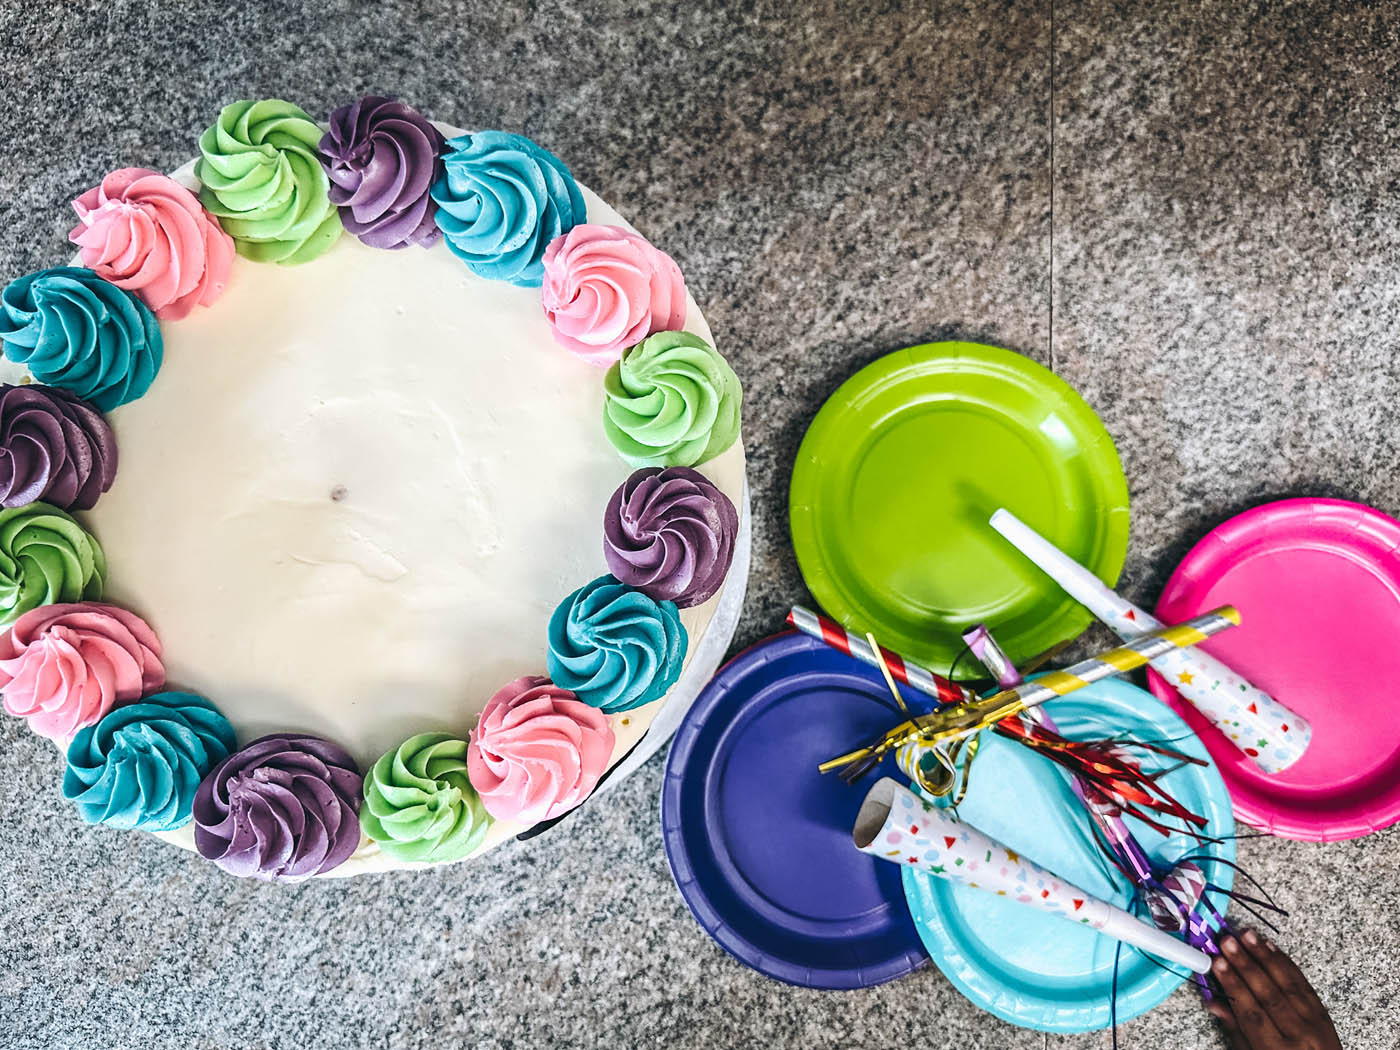 A cake and party supplies - party utensil supplies provided at Romp n' Roll toddler birthday venues in Charlotte, NC.